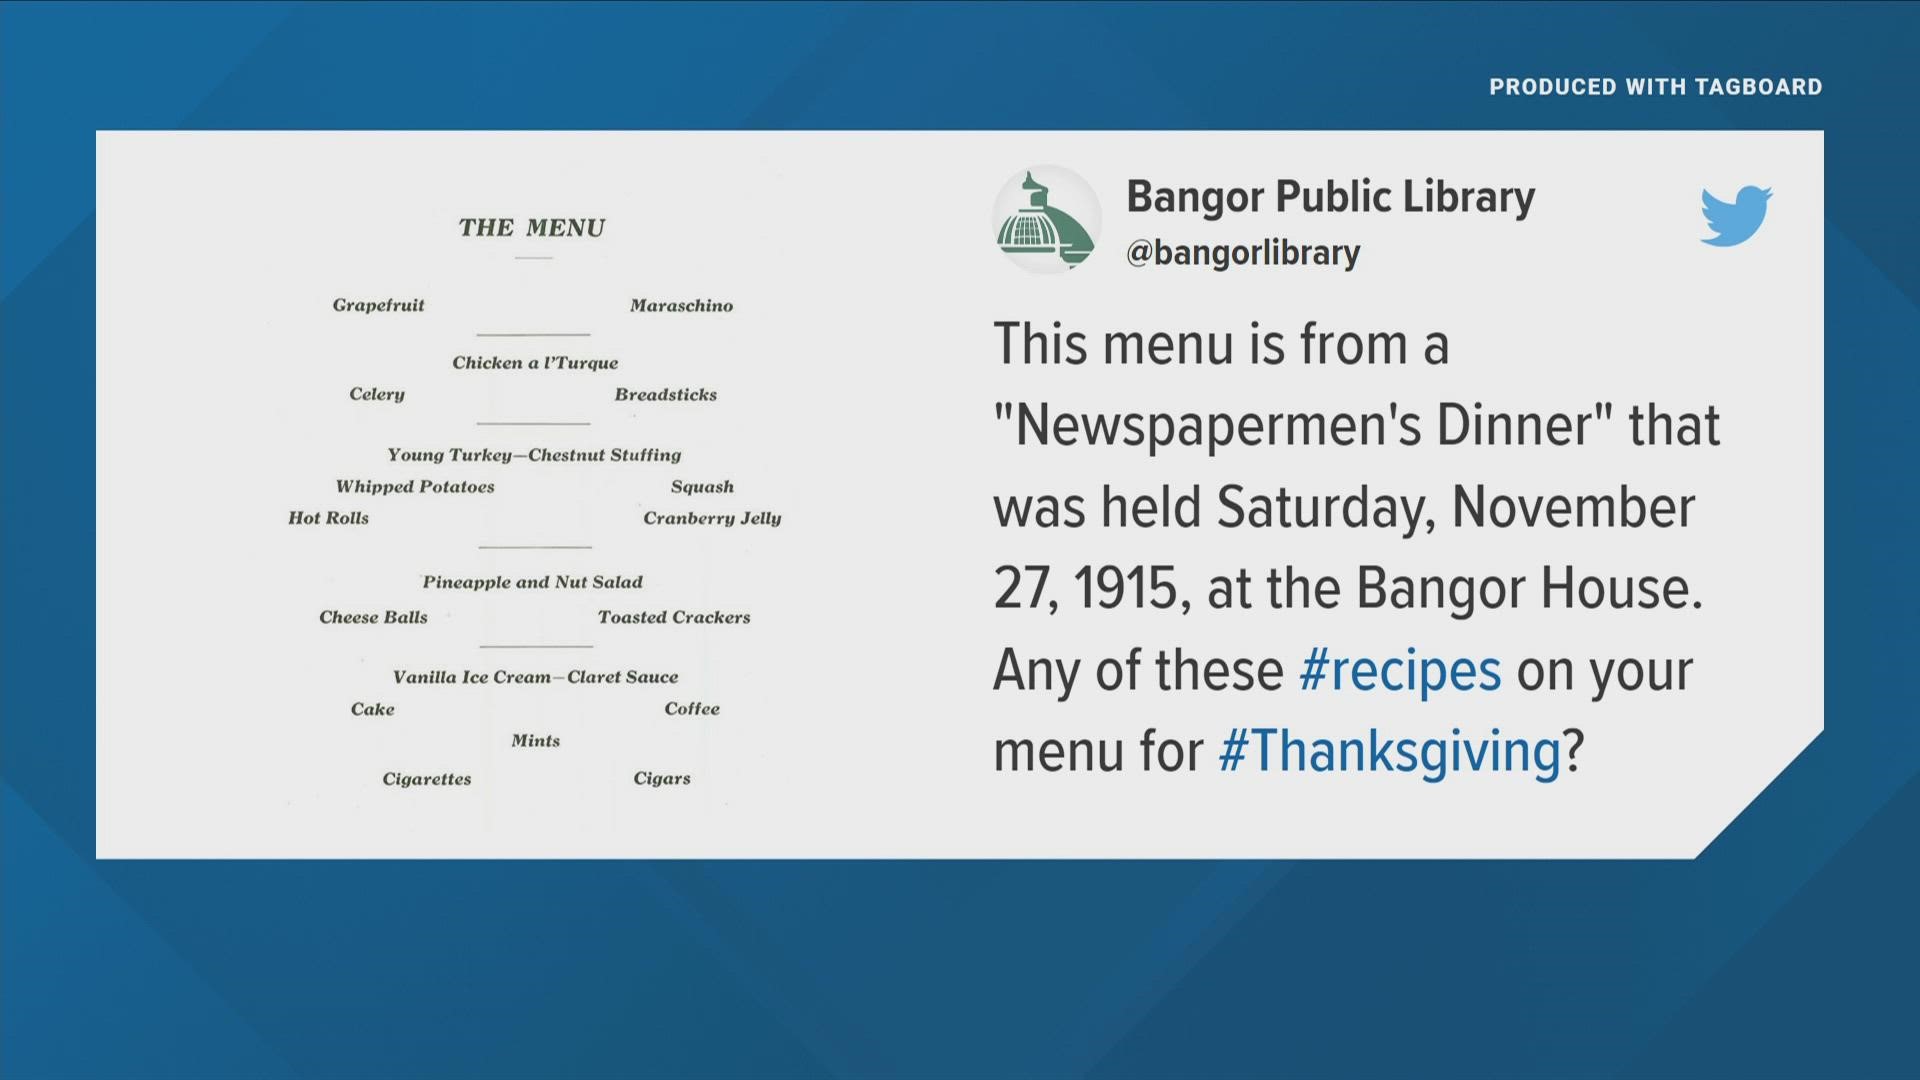 The Bangor Public Library held a "Newspapermen's Dinner" in late November of 1915. Check out their menu!